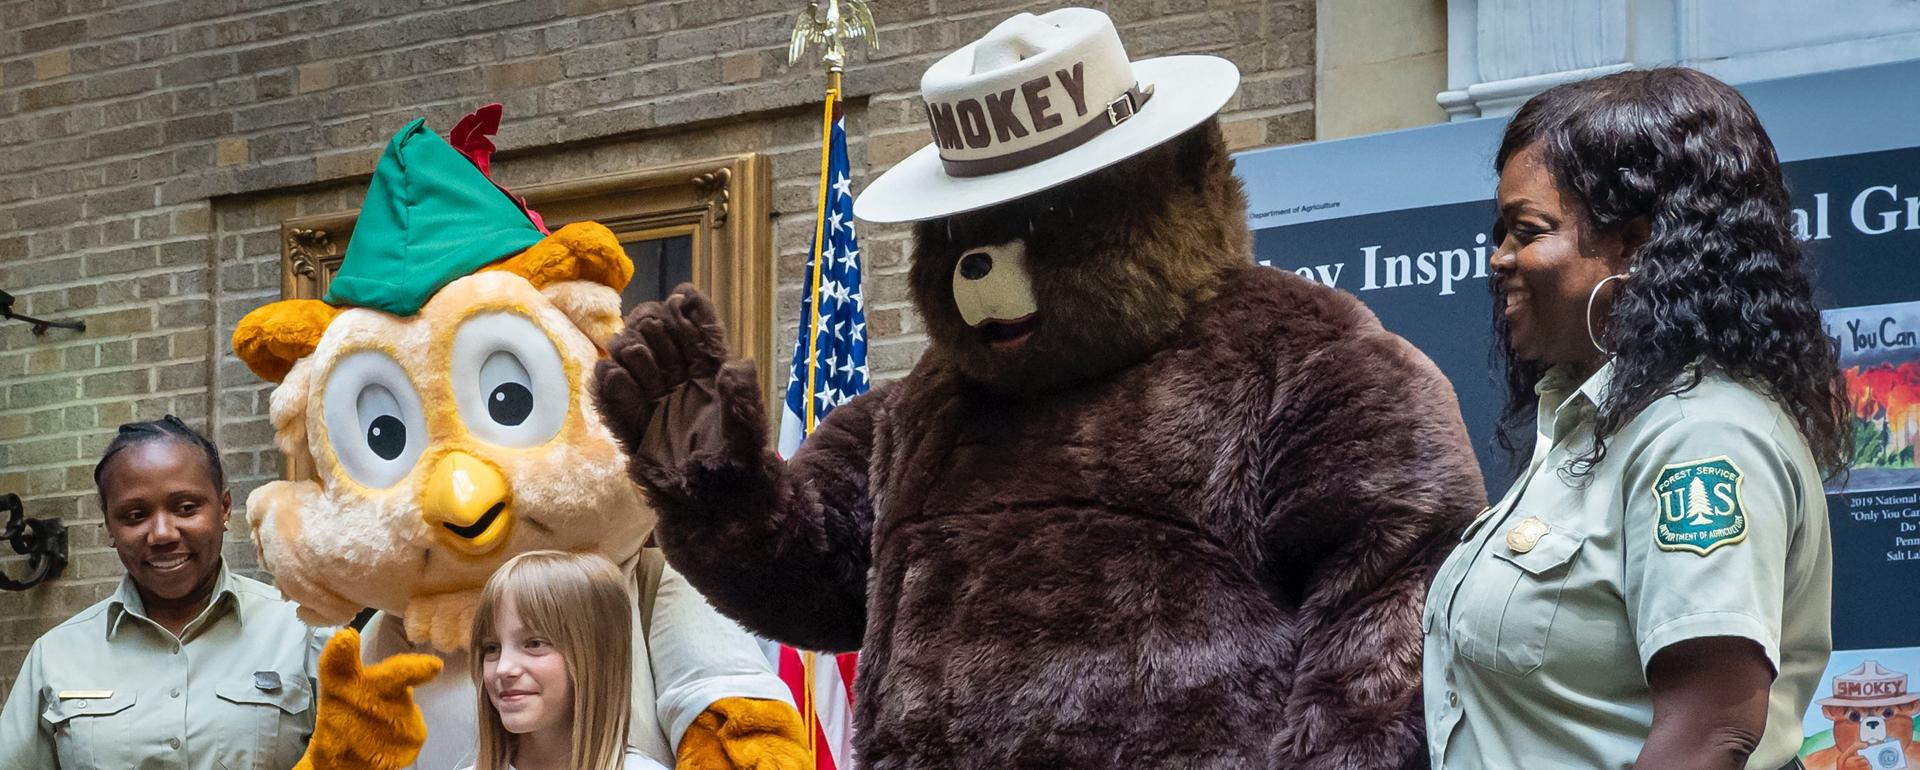 Smokey and Woodsy support Diversity, Equity and Inclusion